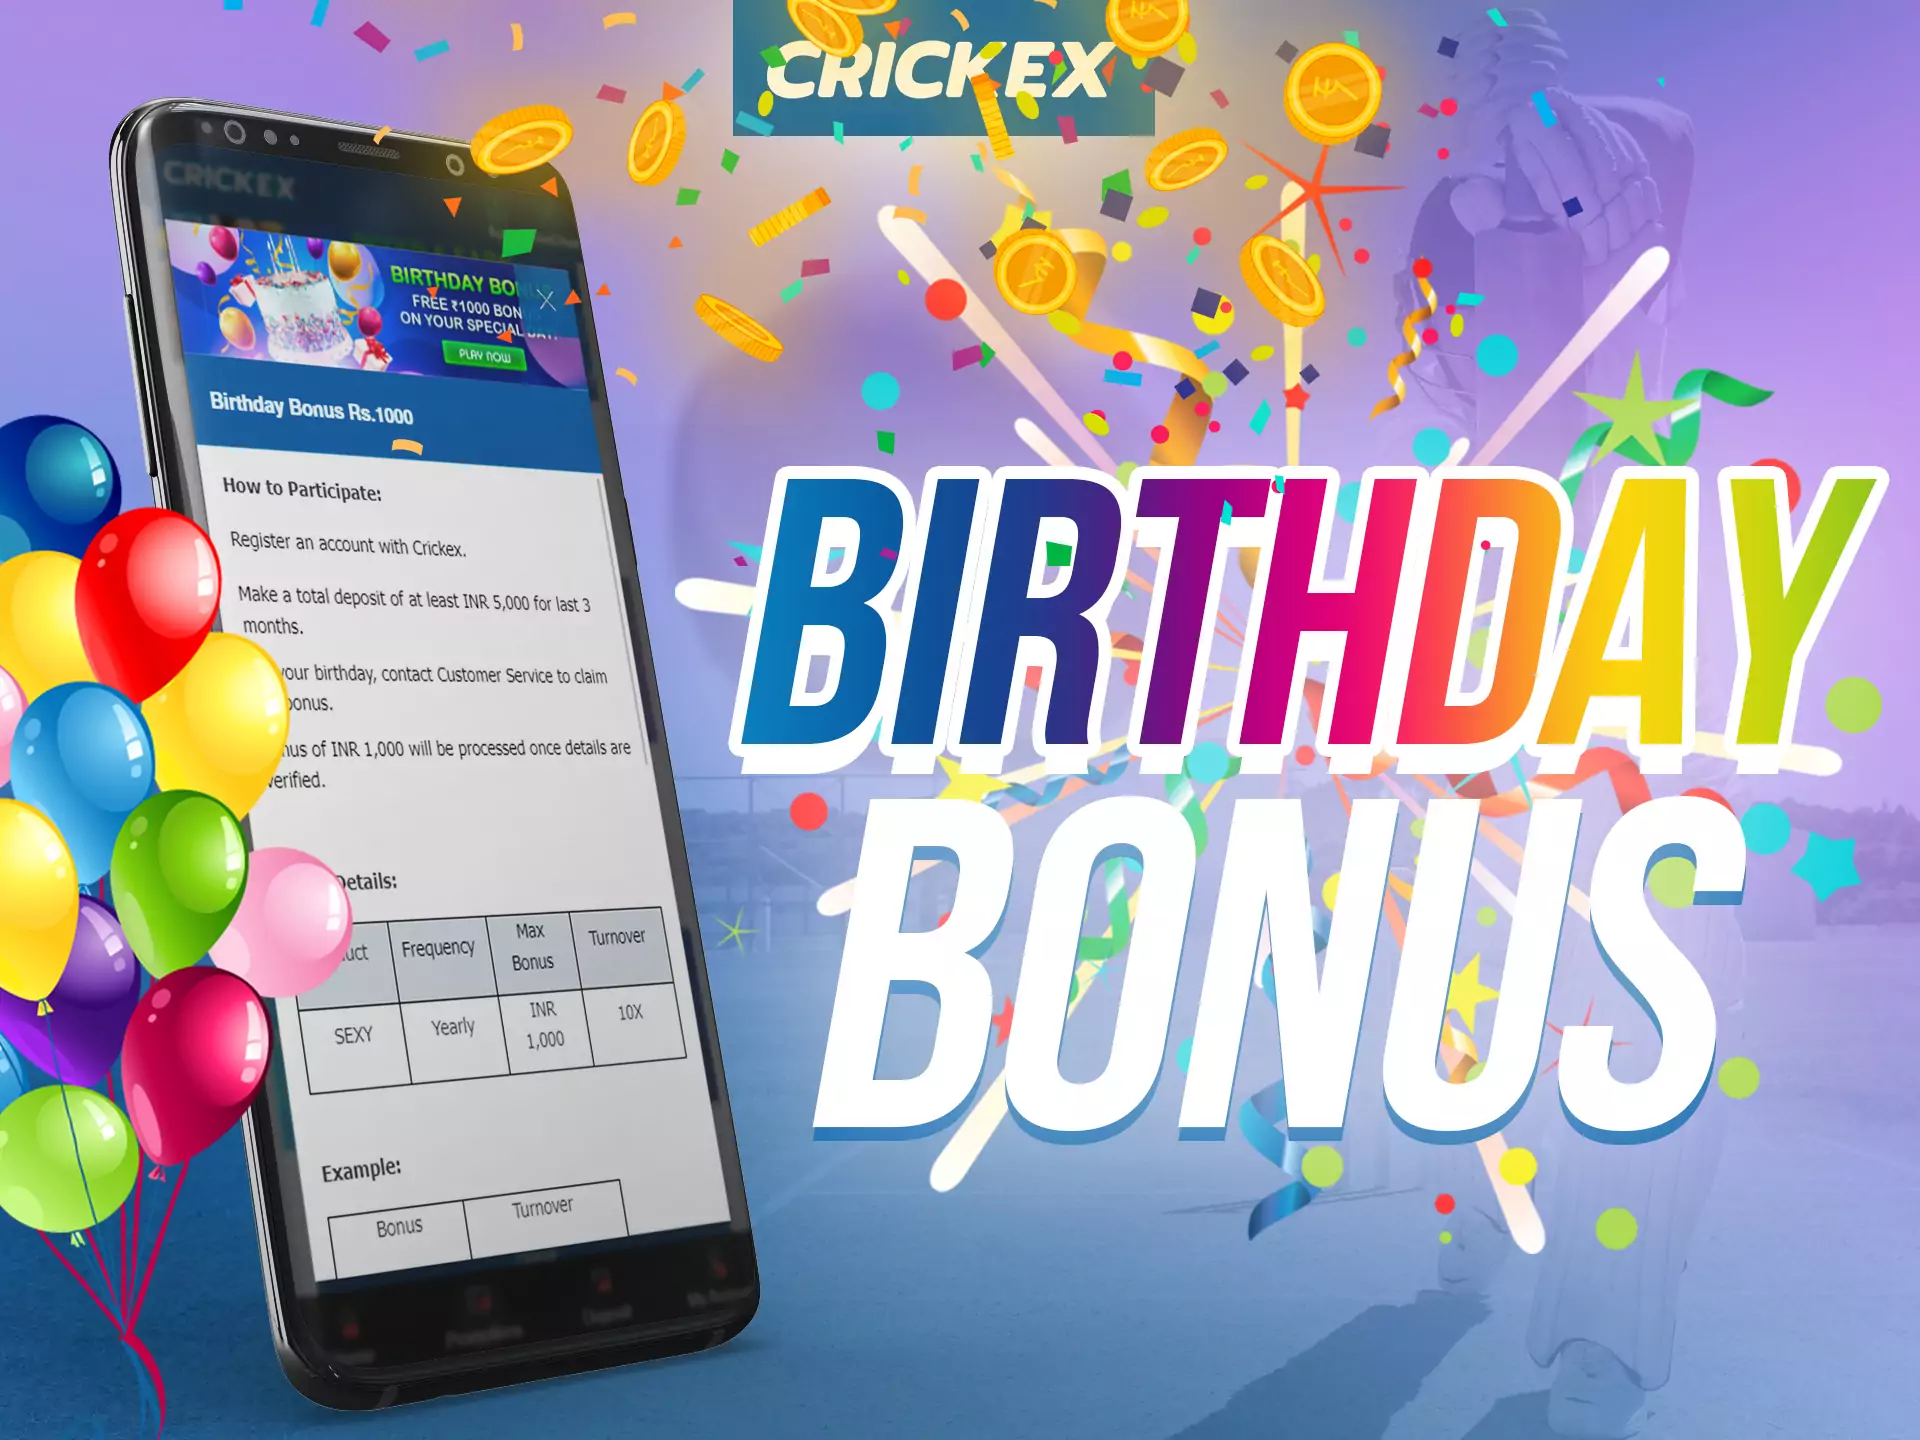 In the Crickex app if it's your birthday you get a great bonus.